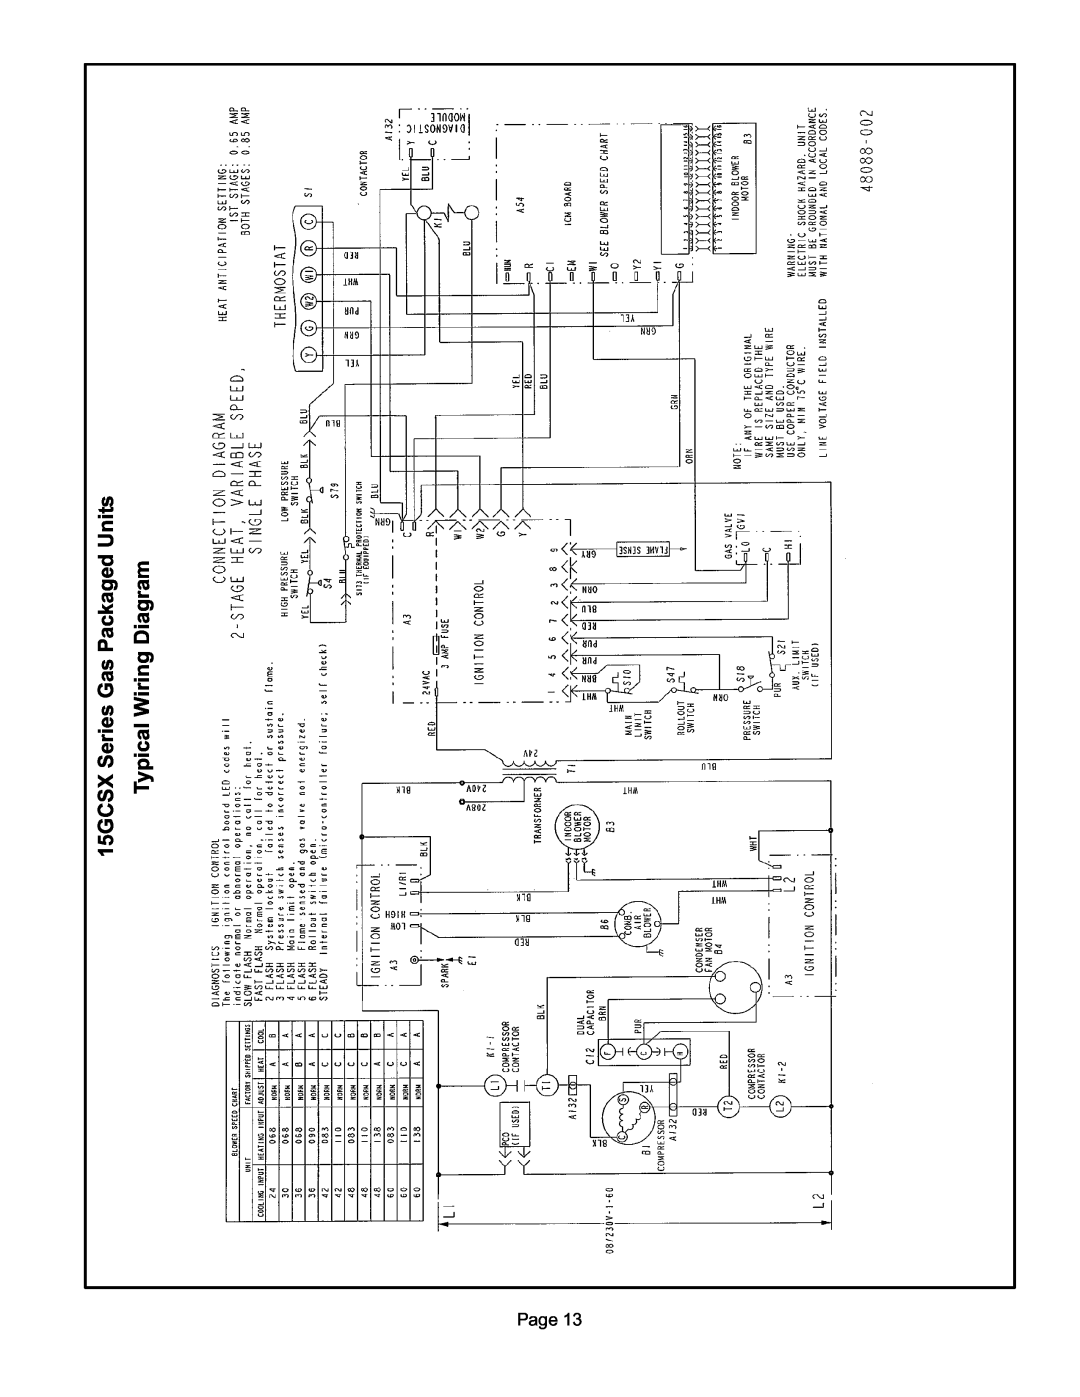 Lennox International Inc installation instructions 15GCSX Series Gas Packaged Units, Typical Wiring Diagram, Page 